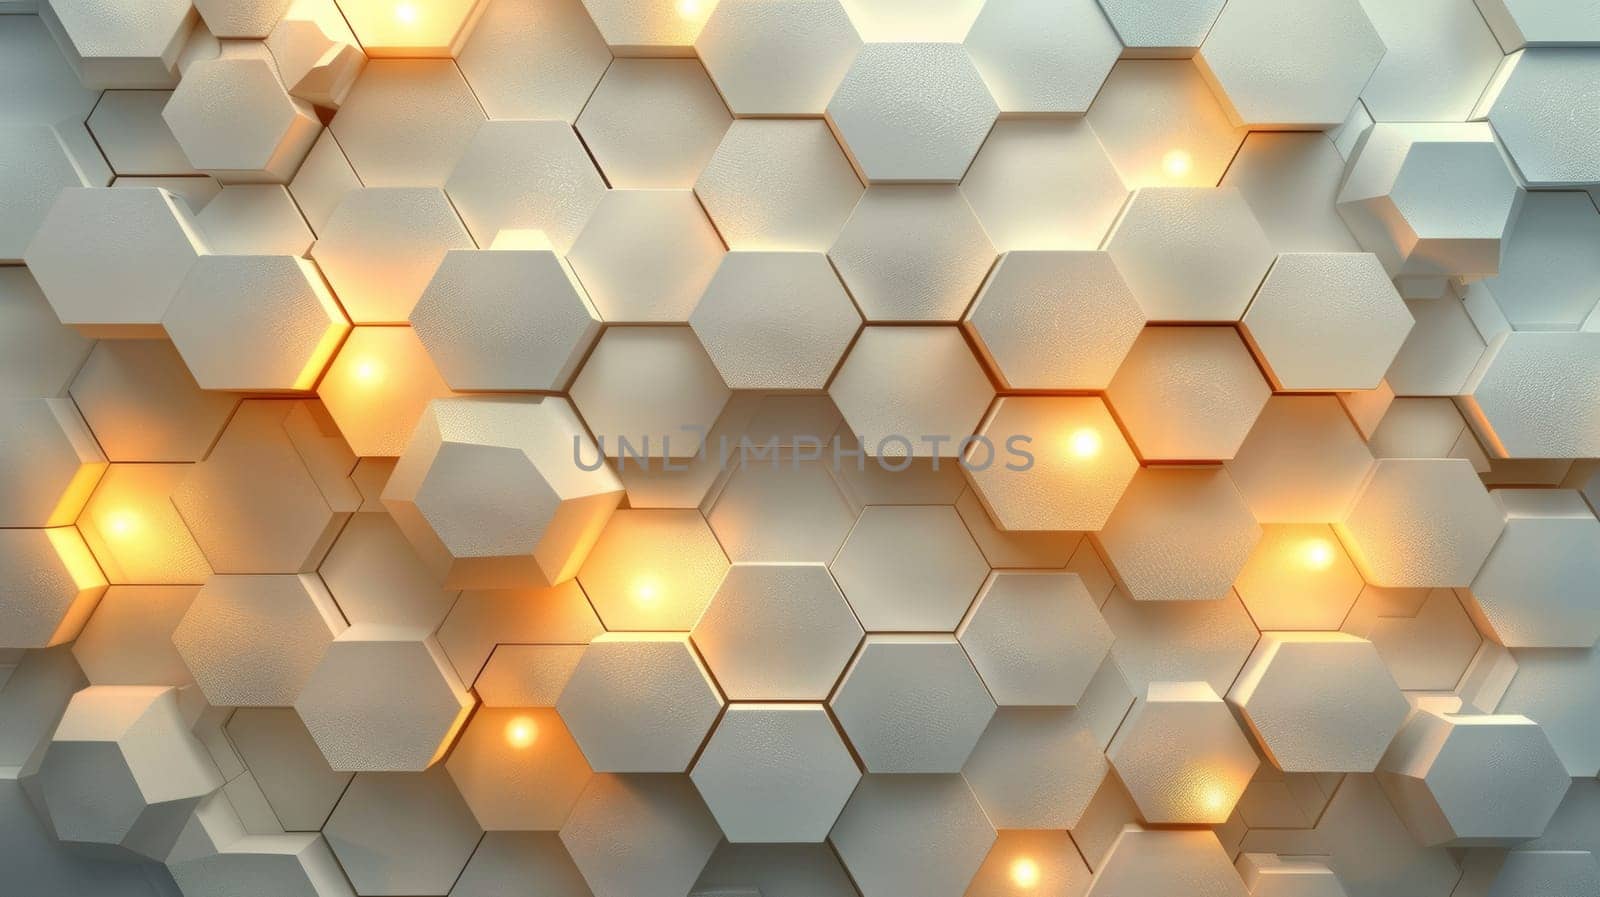 A white and yellow hexagonal pattern with lights on it